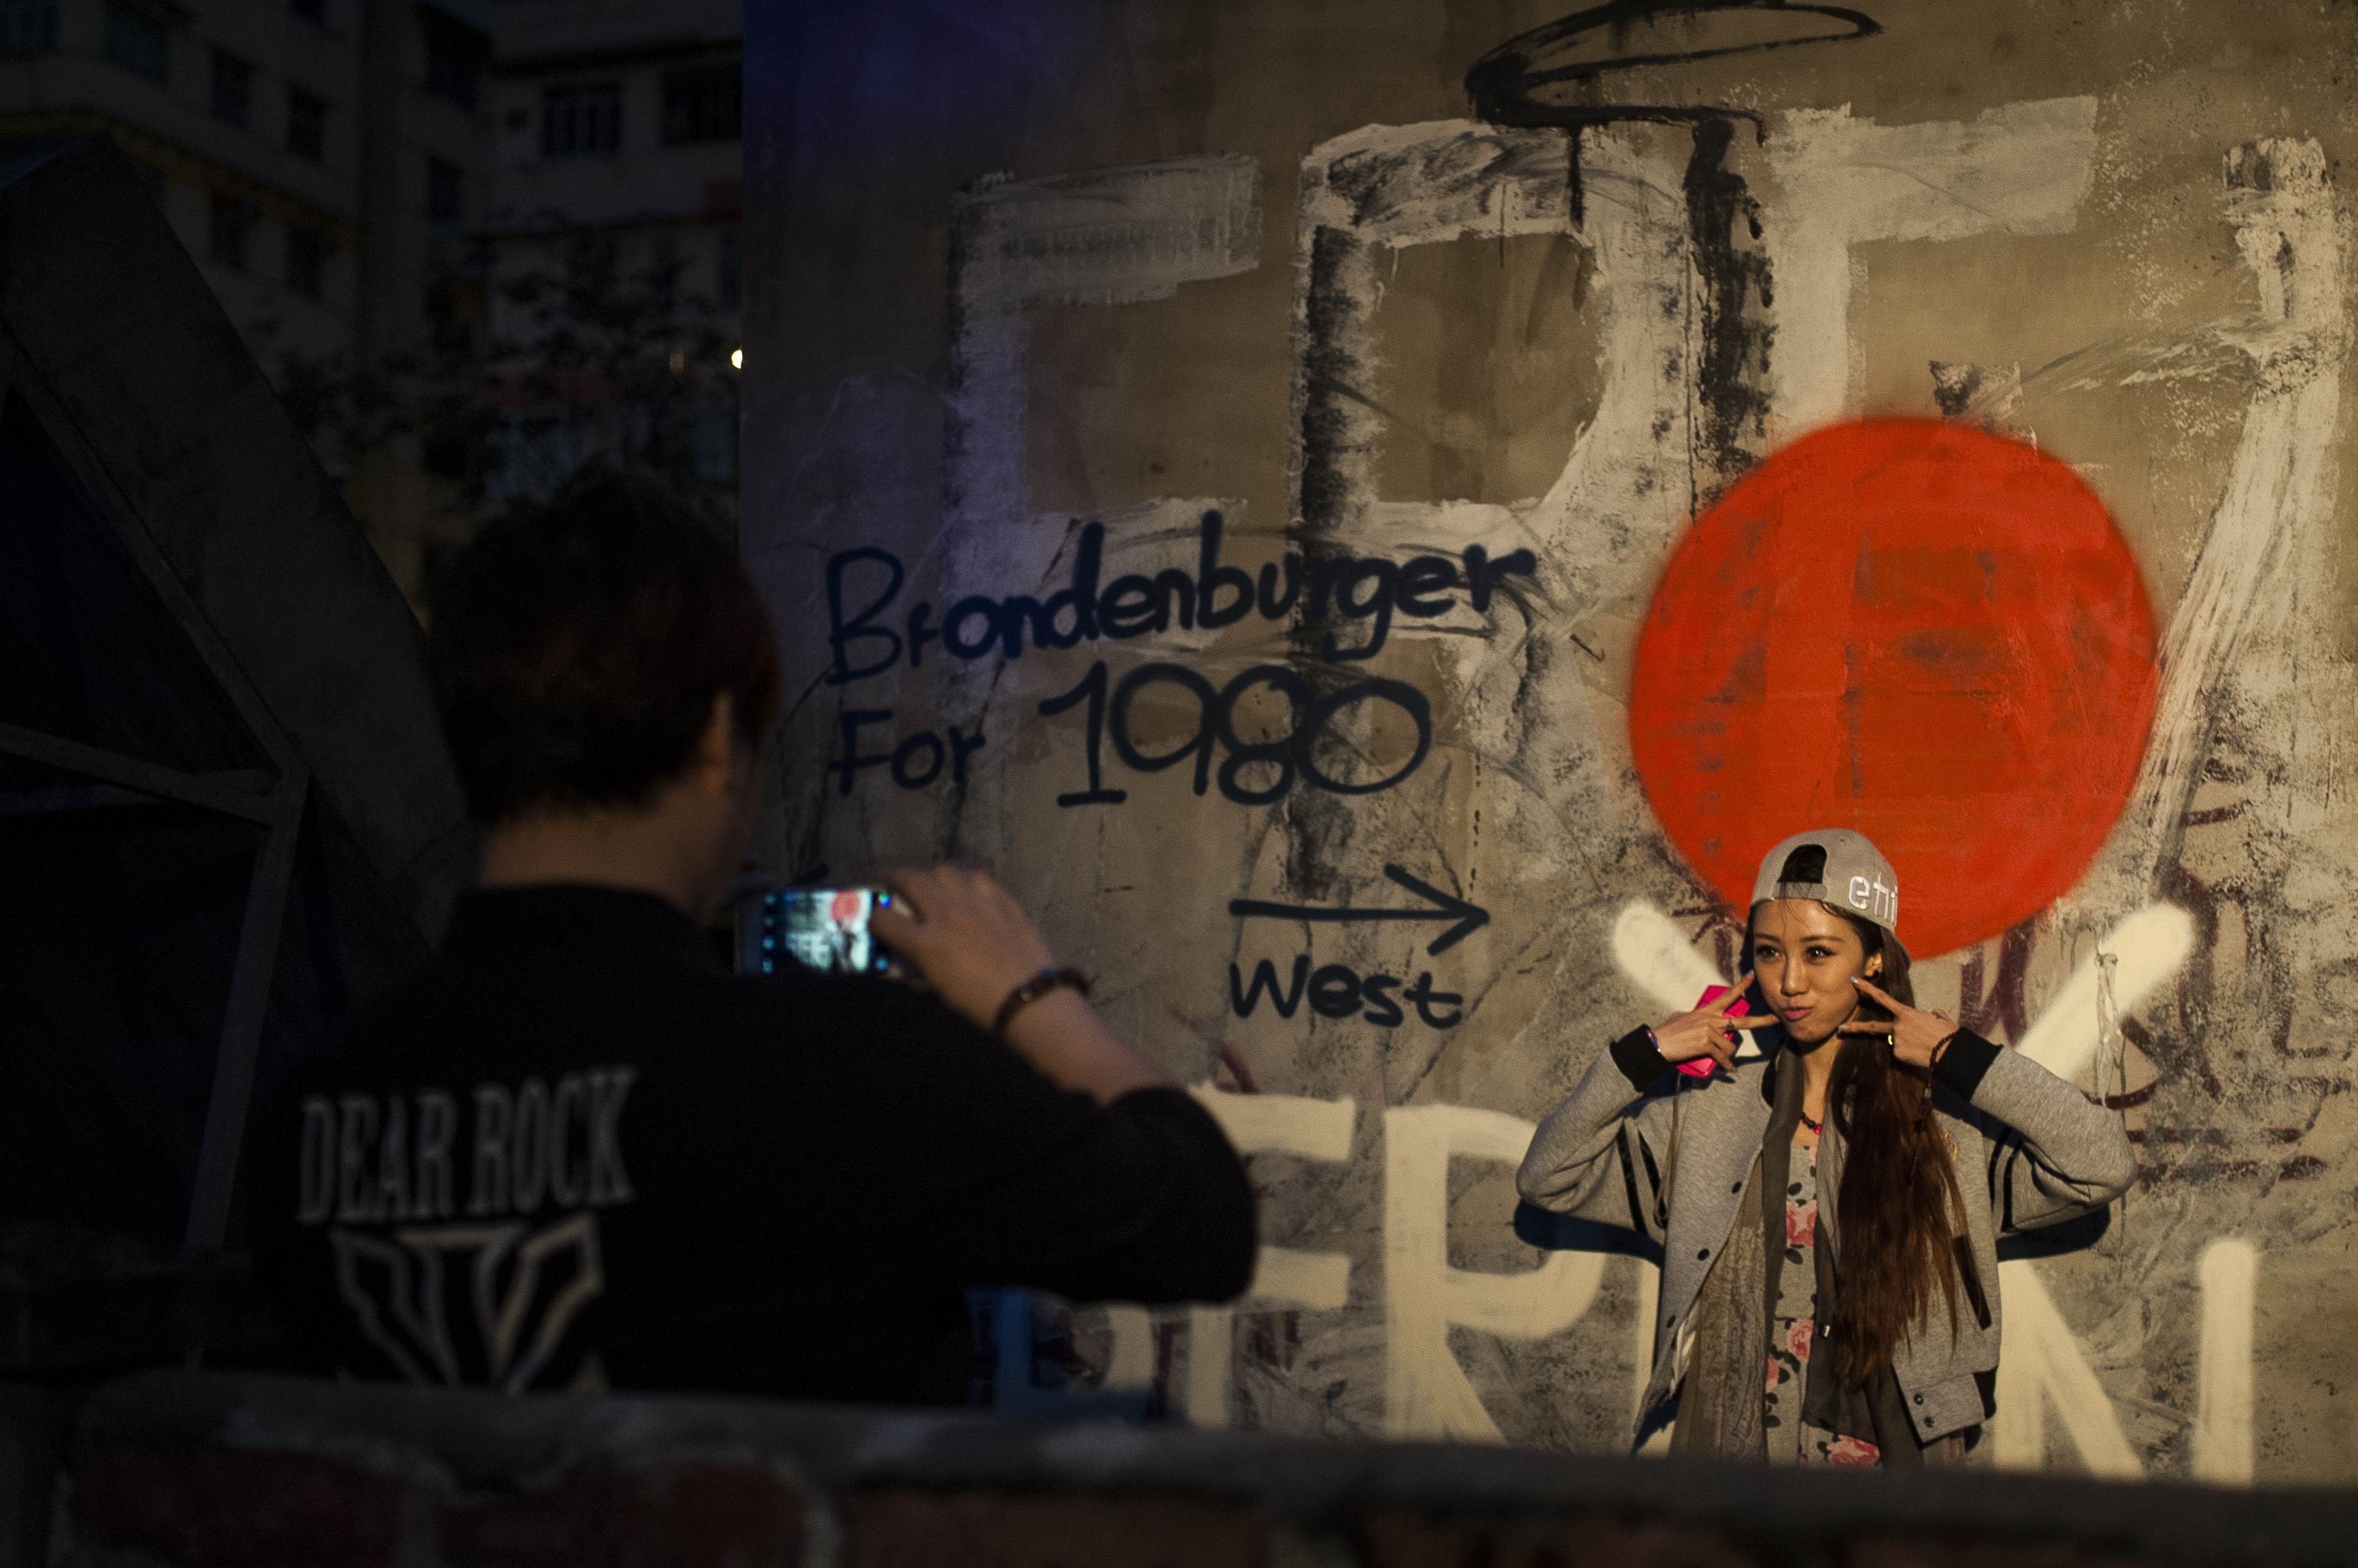 Visitors take pictures in front of a Berlin Wall graffiti replica at the Berlin Fest at Cattle Depot Artist Village in Hong Kong, to commemorate the 25th anniversary of the fall of the wall. Photo: AFP